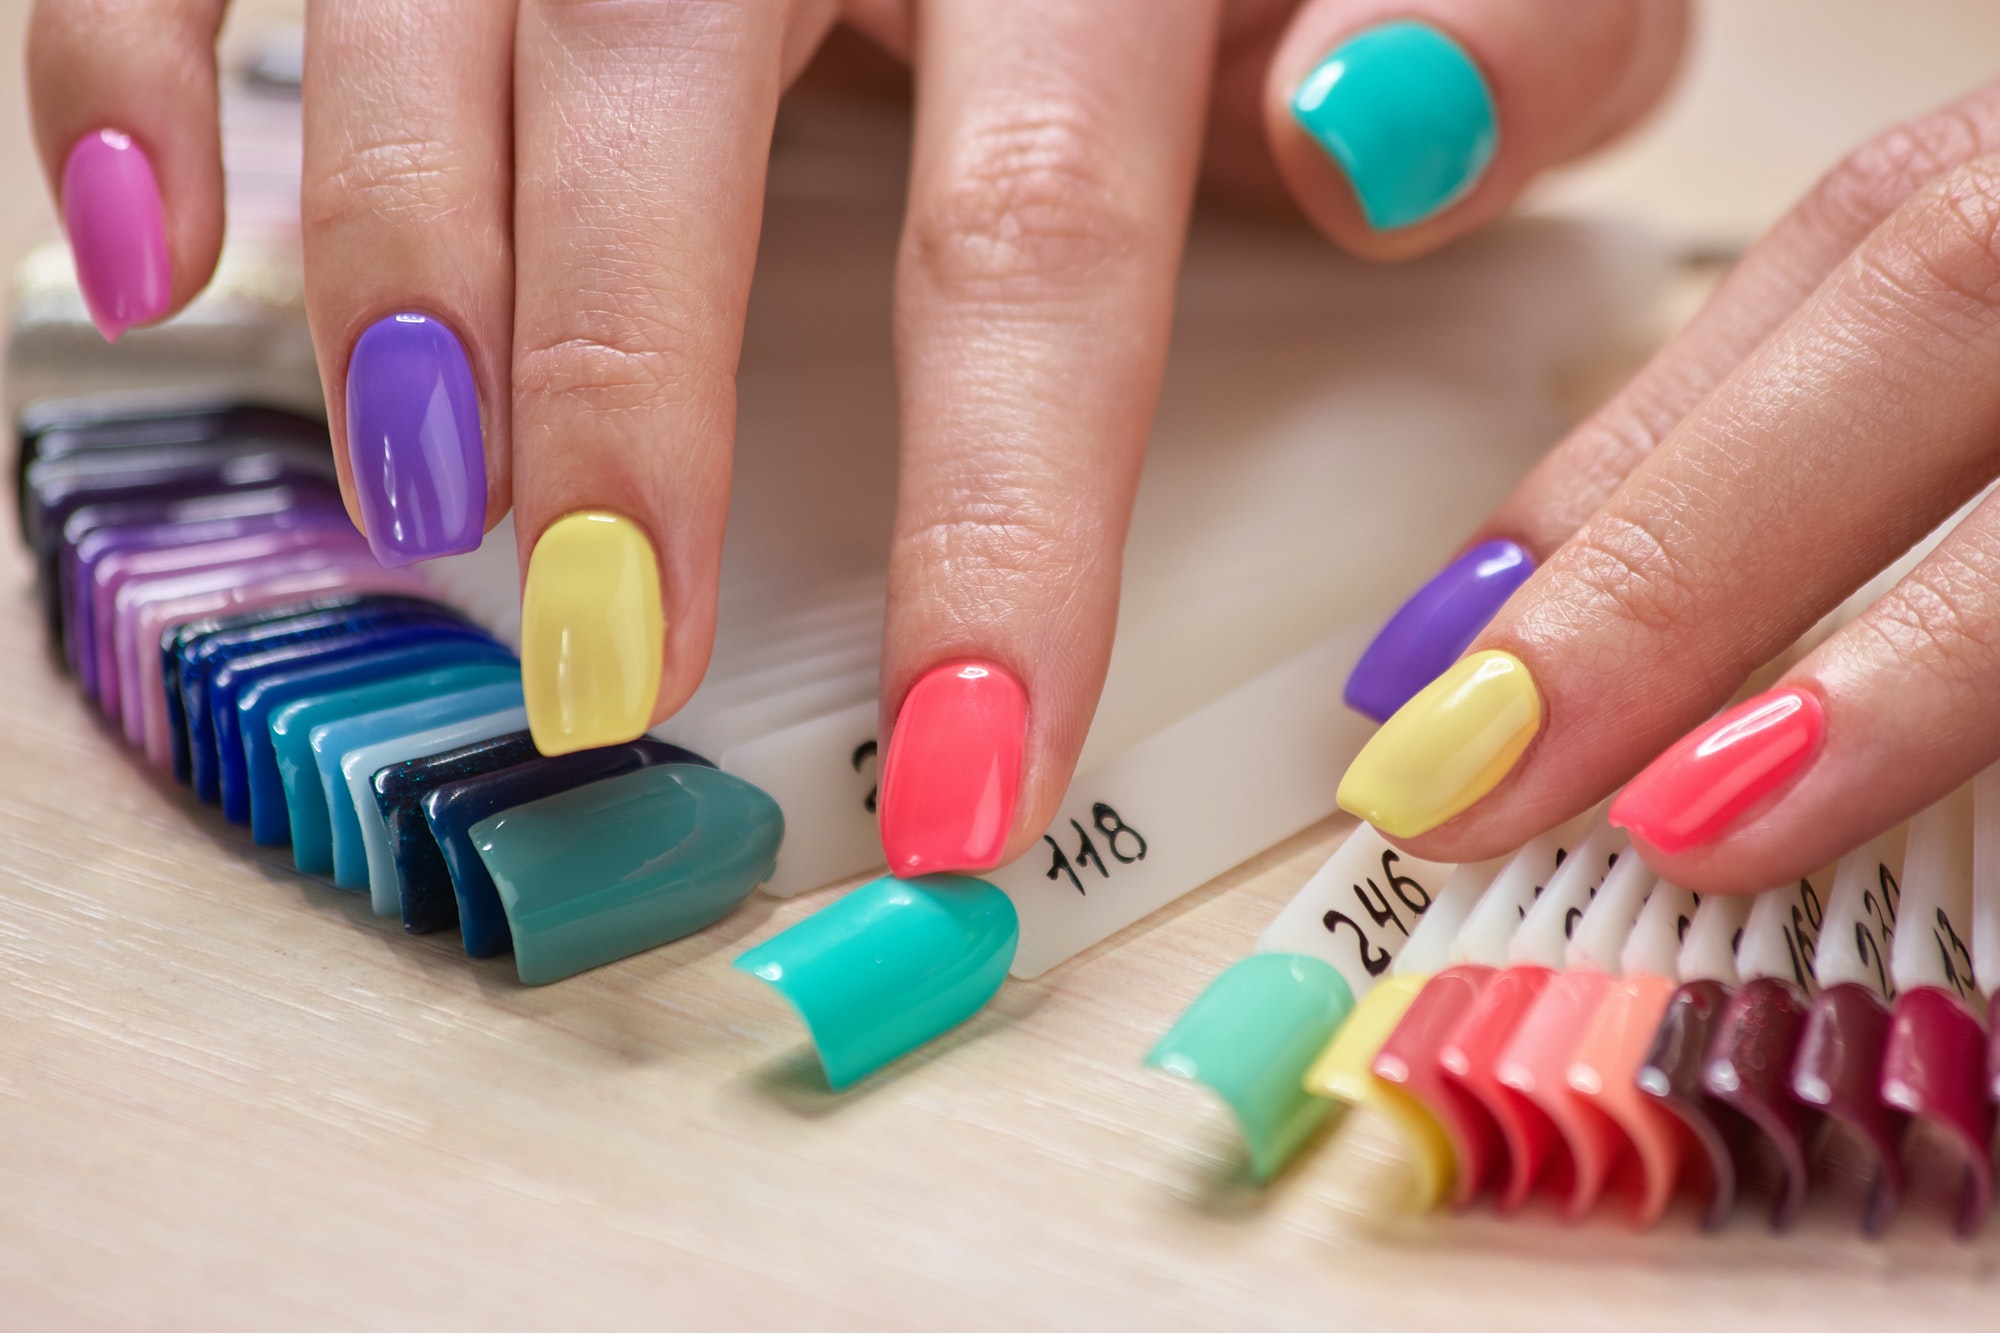 Manicured fingers touching nails samples